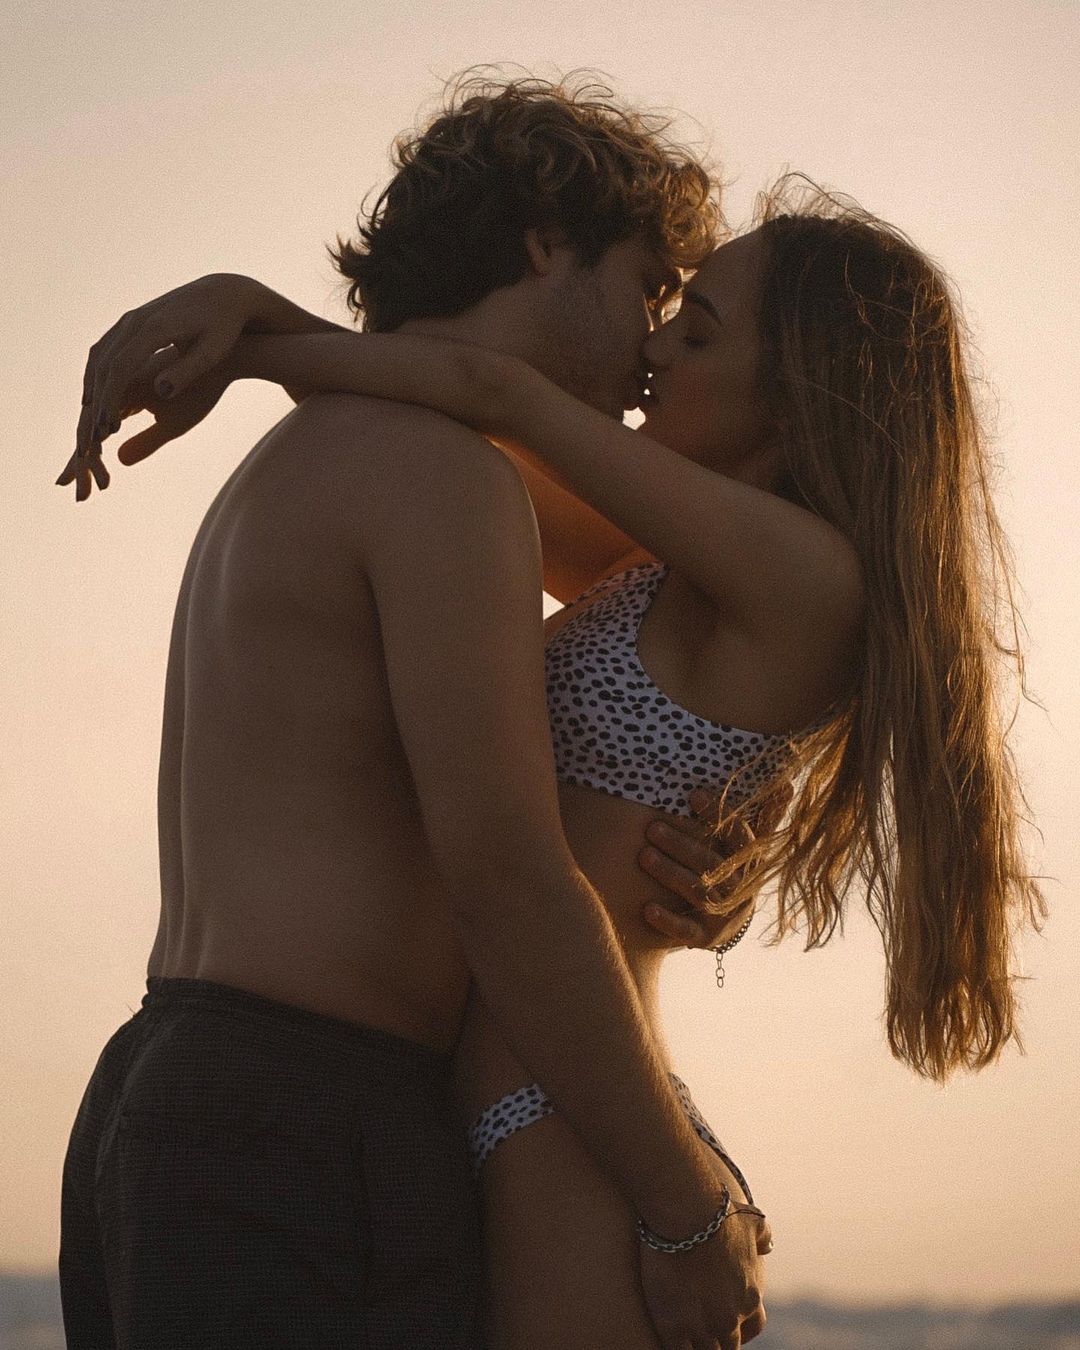 YouTuber couple Maddie Joy and Elijah Wireman beach moment posted on Instag...